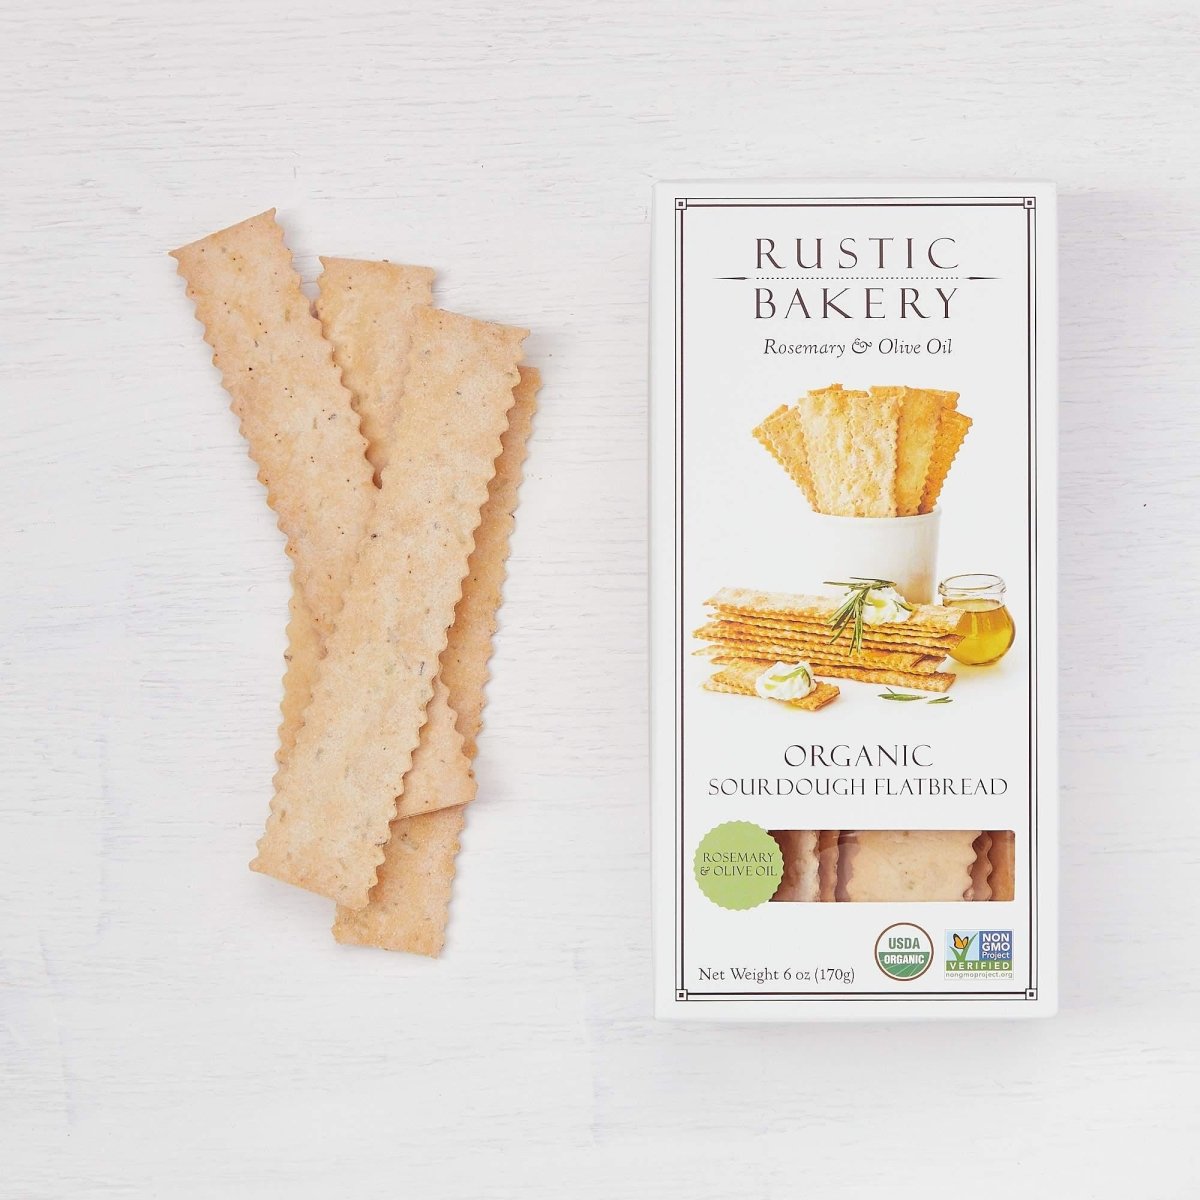 Rustic Bakery - 'Rosemary & Olive Oil' Organic Sourdough Flatbread Crackers (6OZ) - The Epicurean Trader